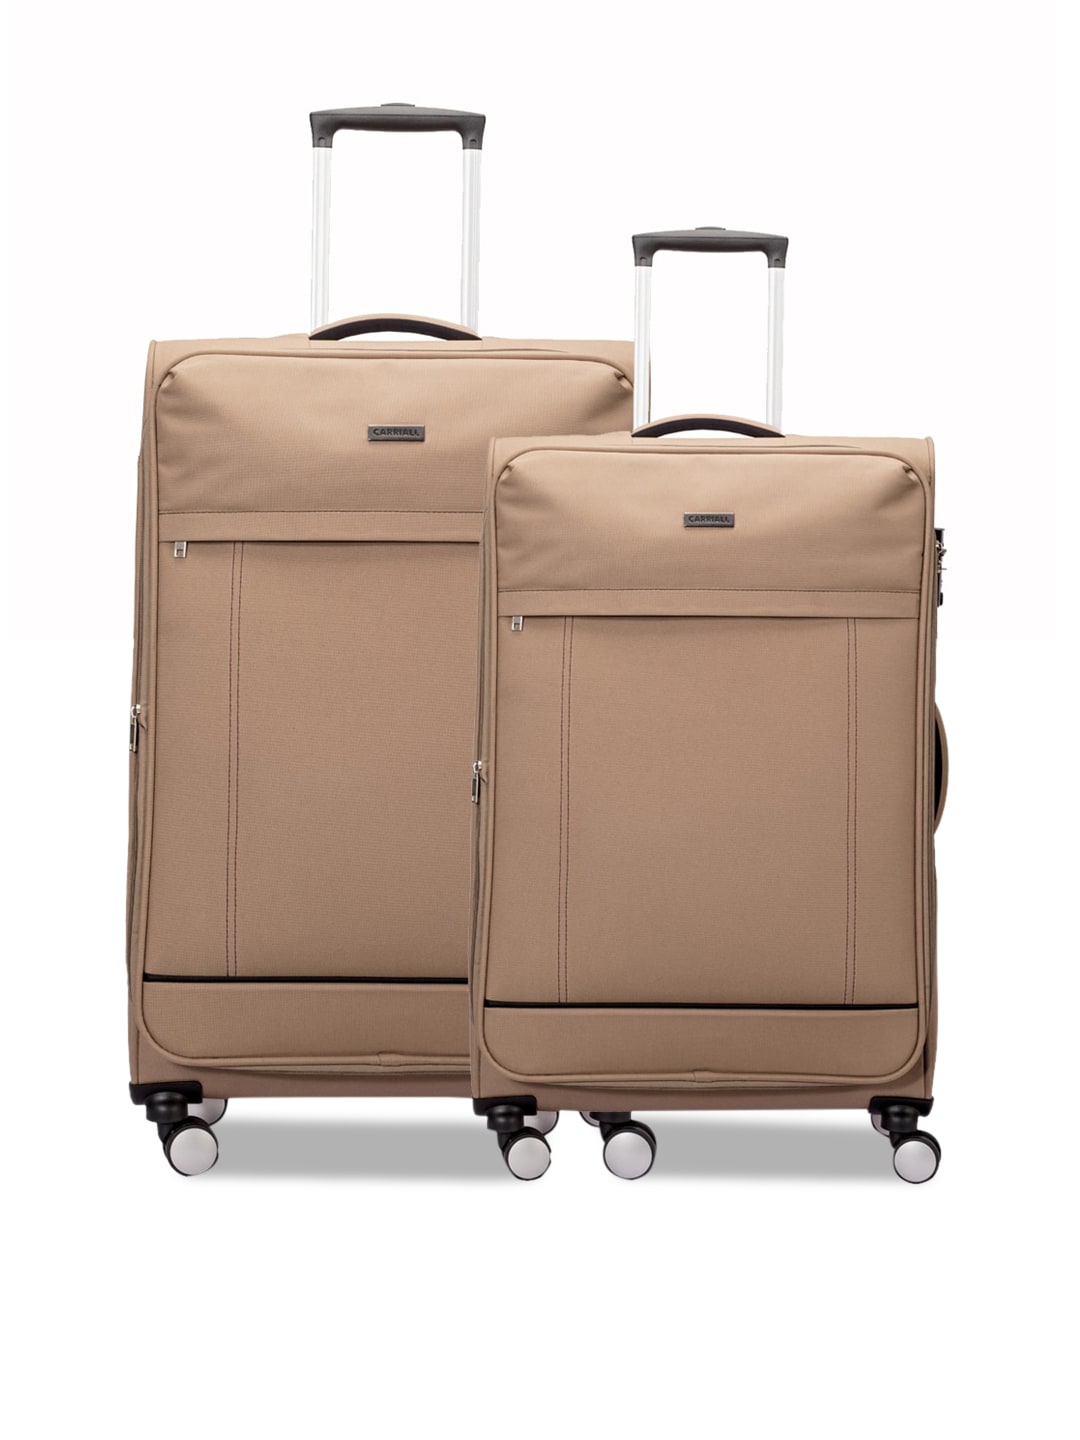 CARRIALL Beige Set of 2 Large & Medium Trolley Bags Price in India